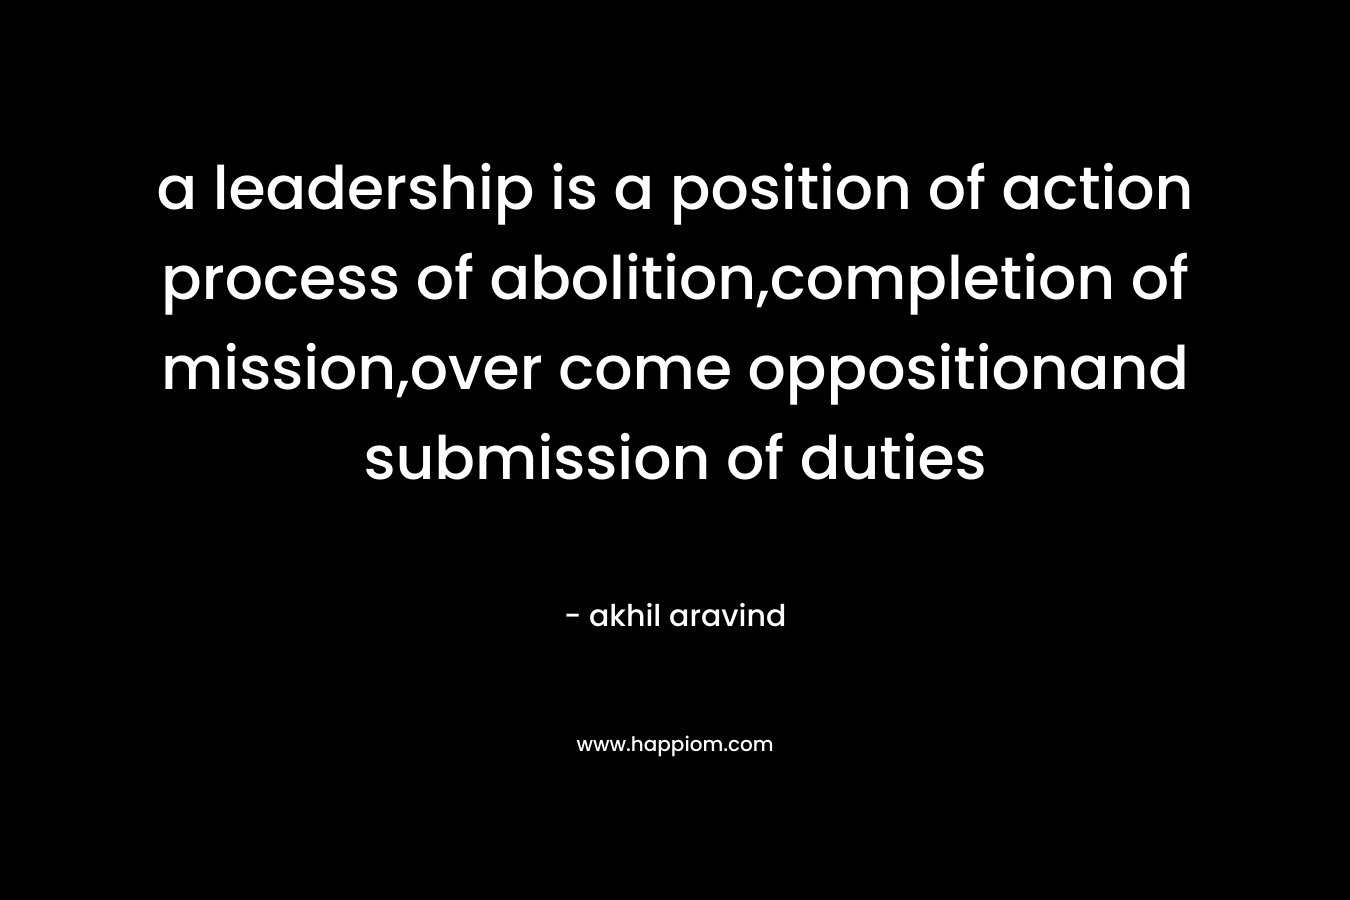 a leadership is a position of action process of abolition,completion of mission,over come oppositionand submission of duties